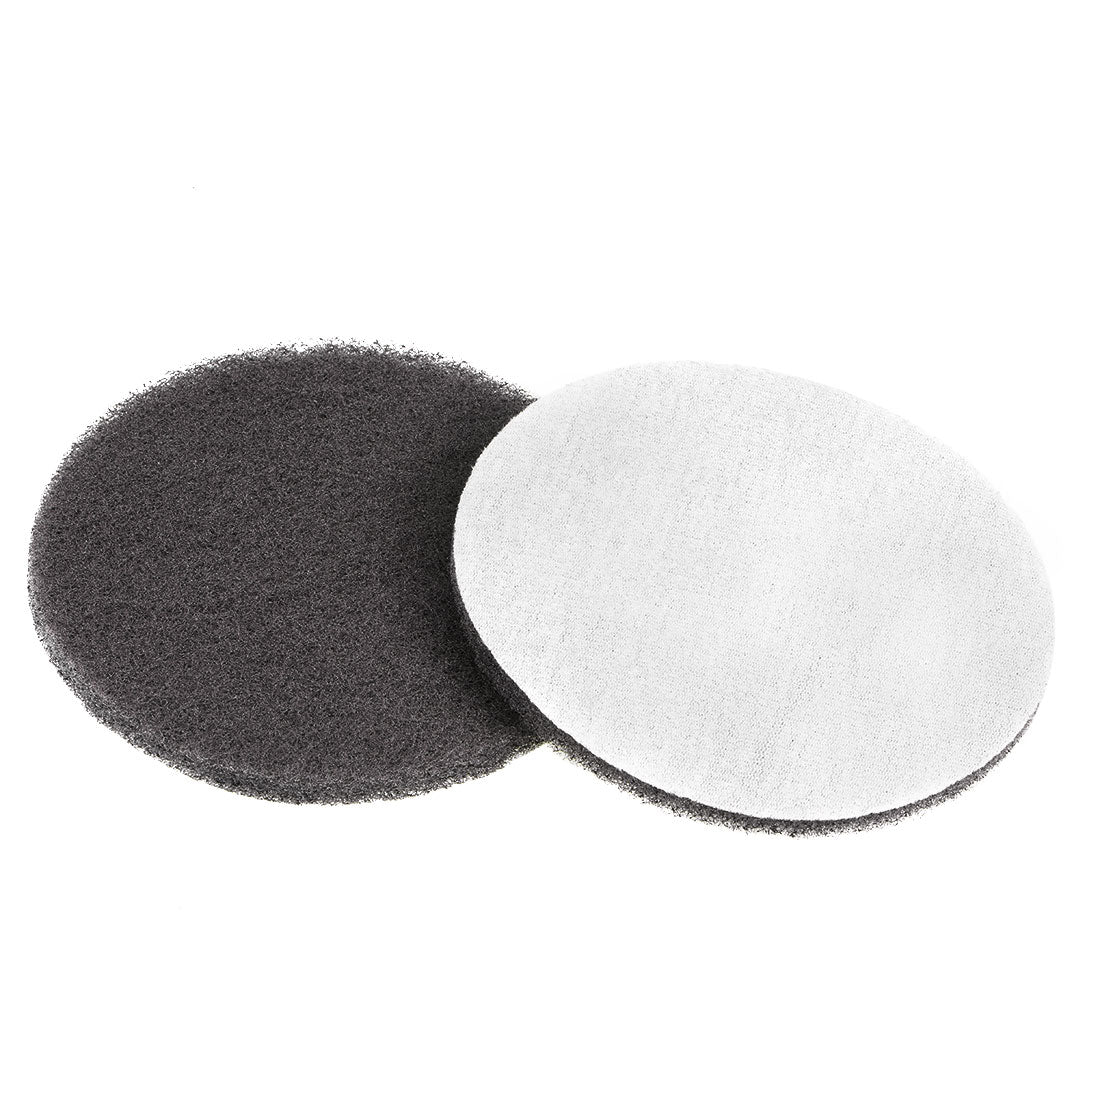 Uxcell Uxcell 5 Inch 1500 Grit Drill Power Brush Tile Scrubber Scouring Pads Cleaning Tool 2pcs